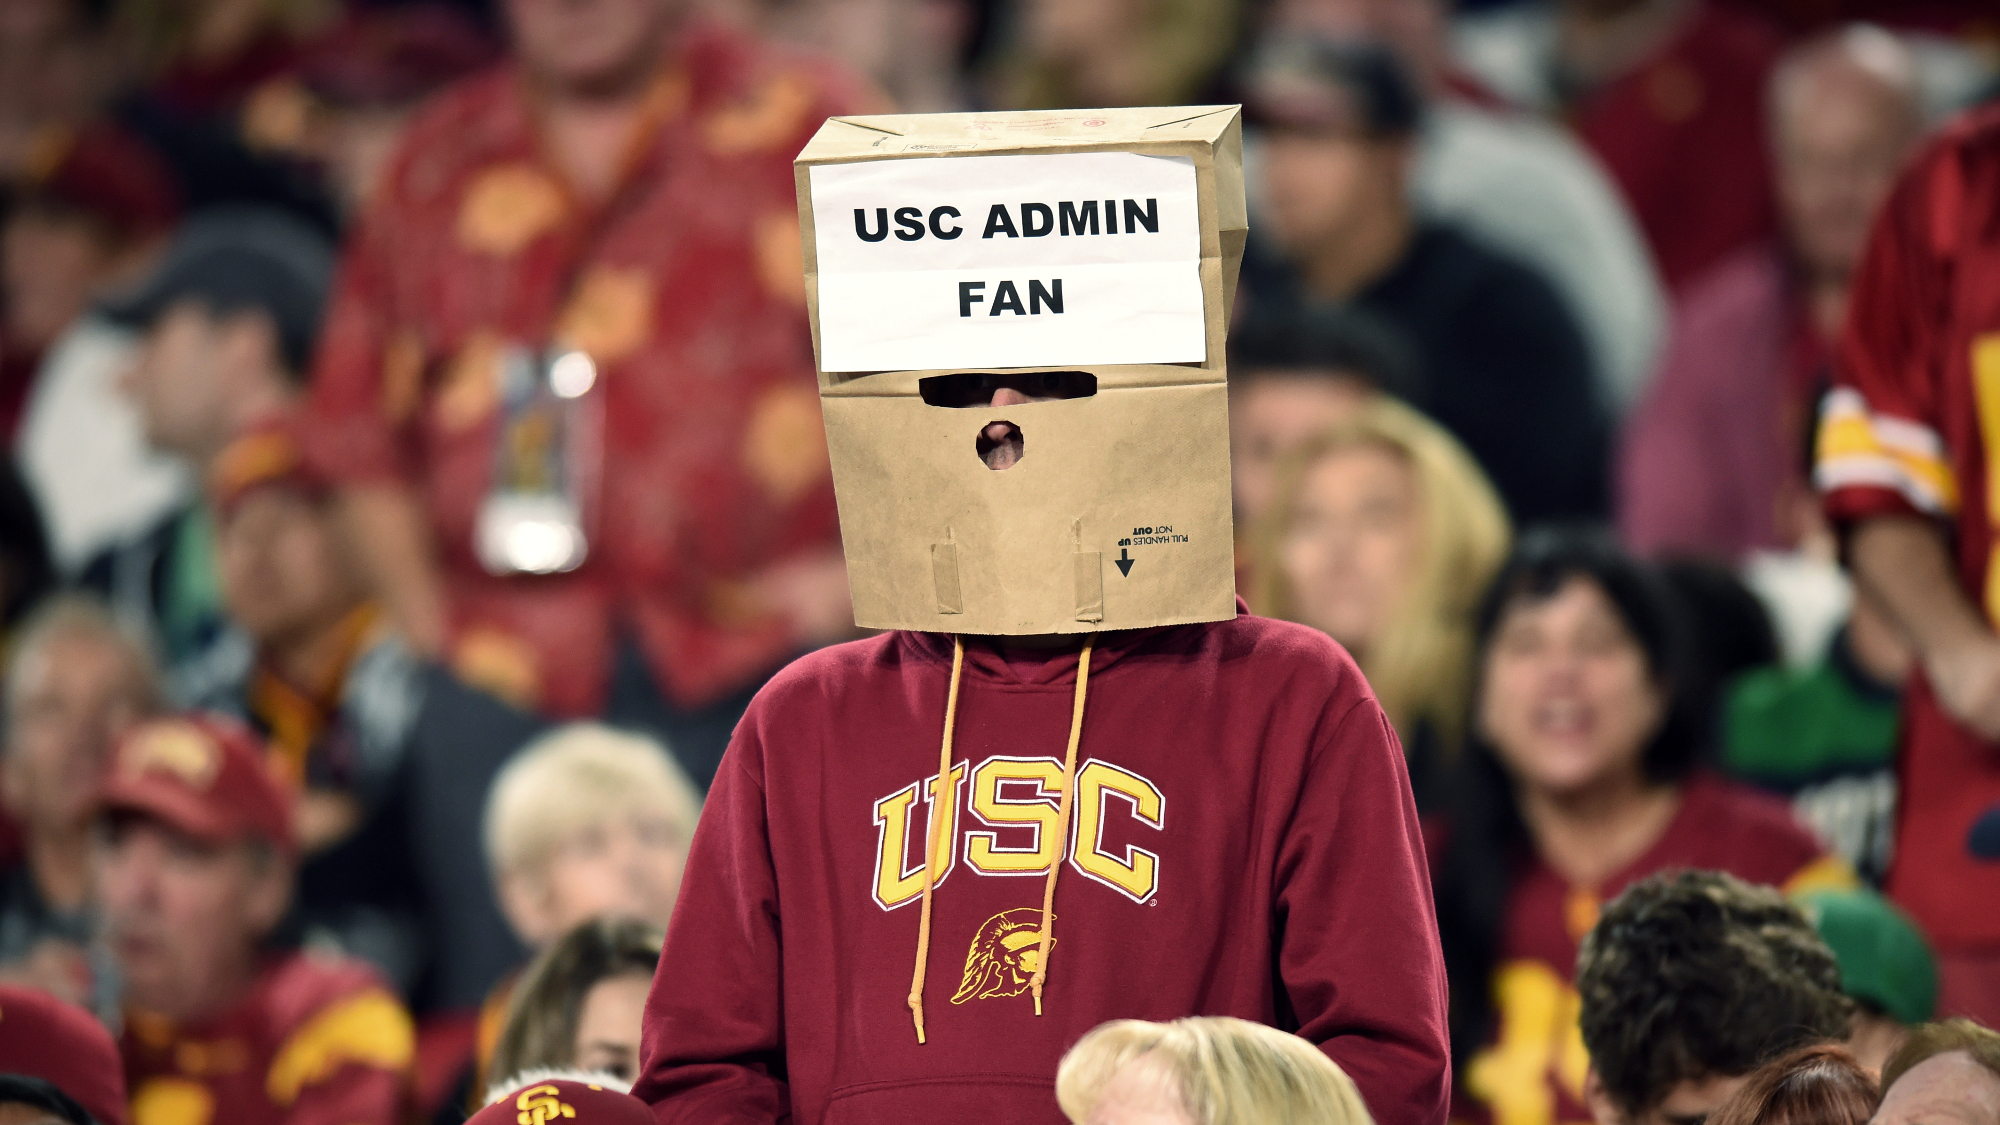 USC criticized for canceling promotion speech